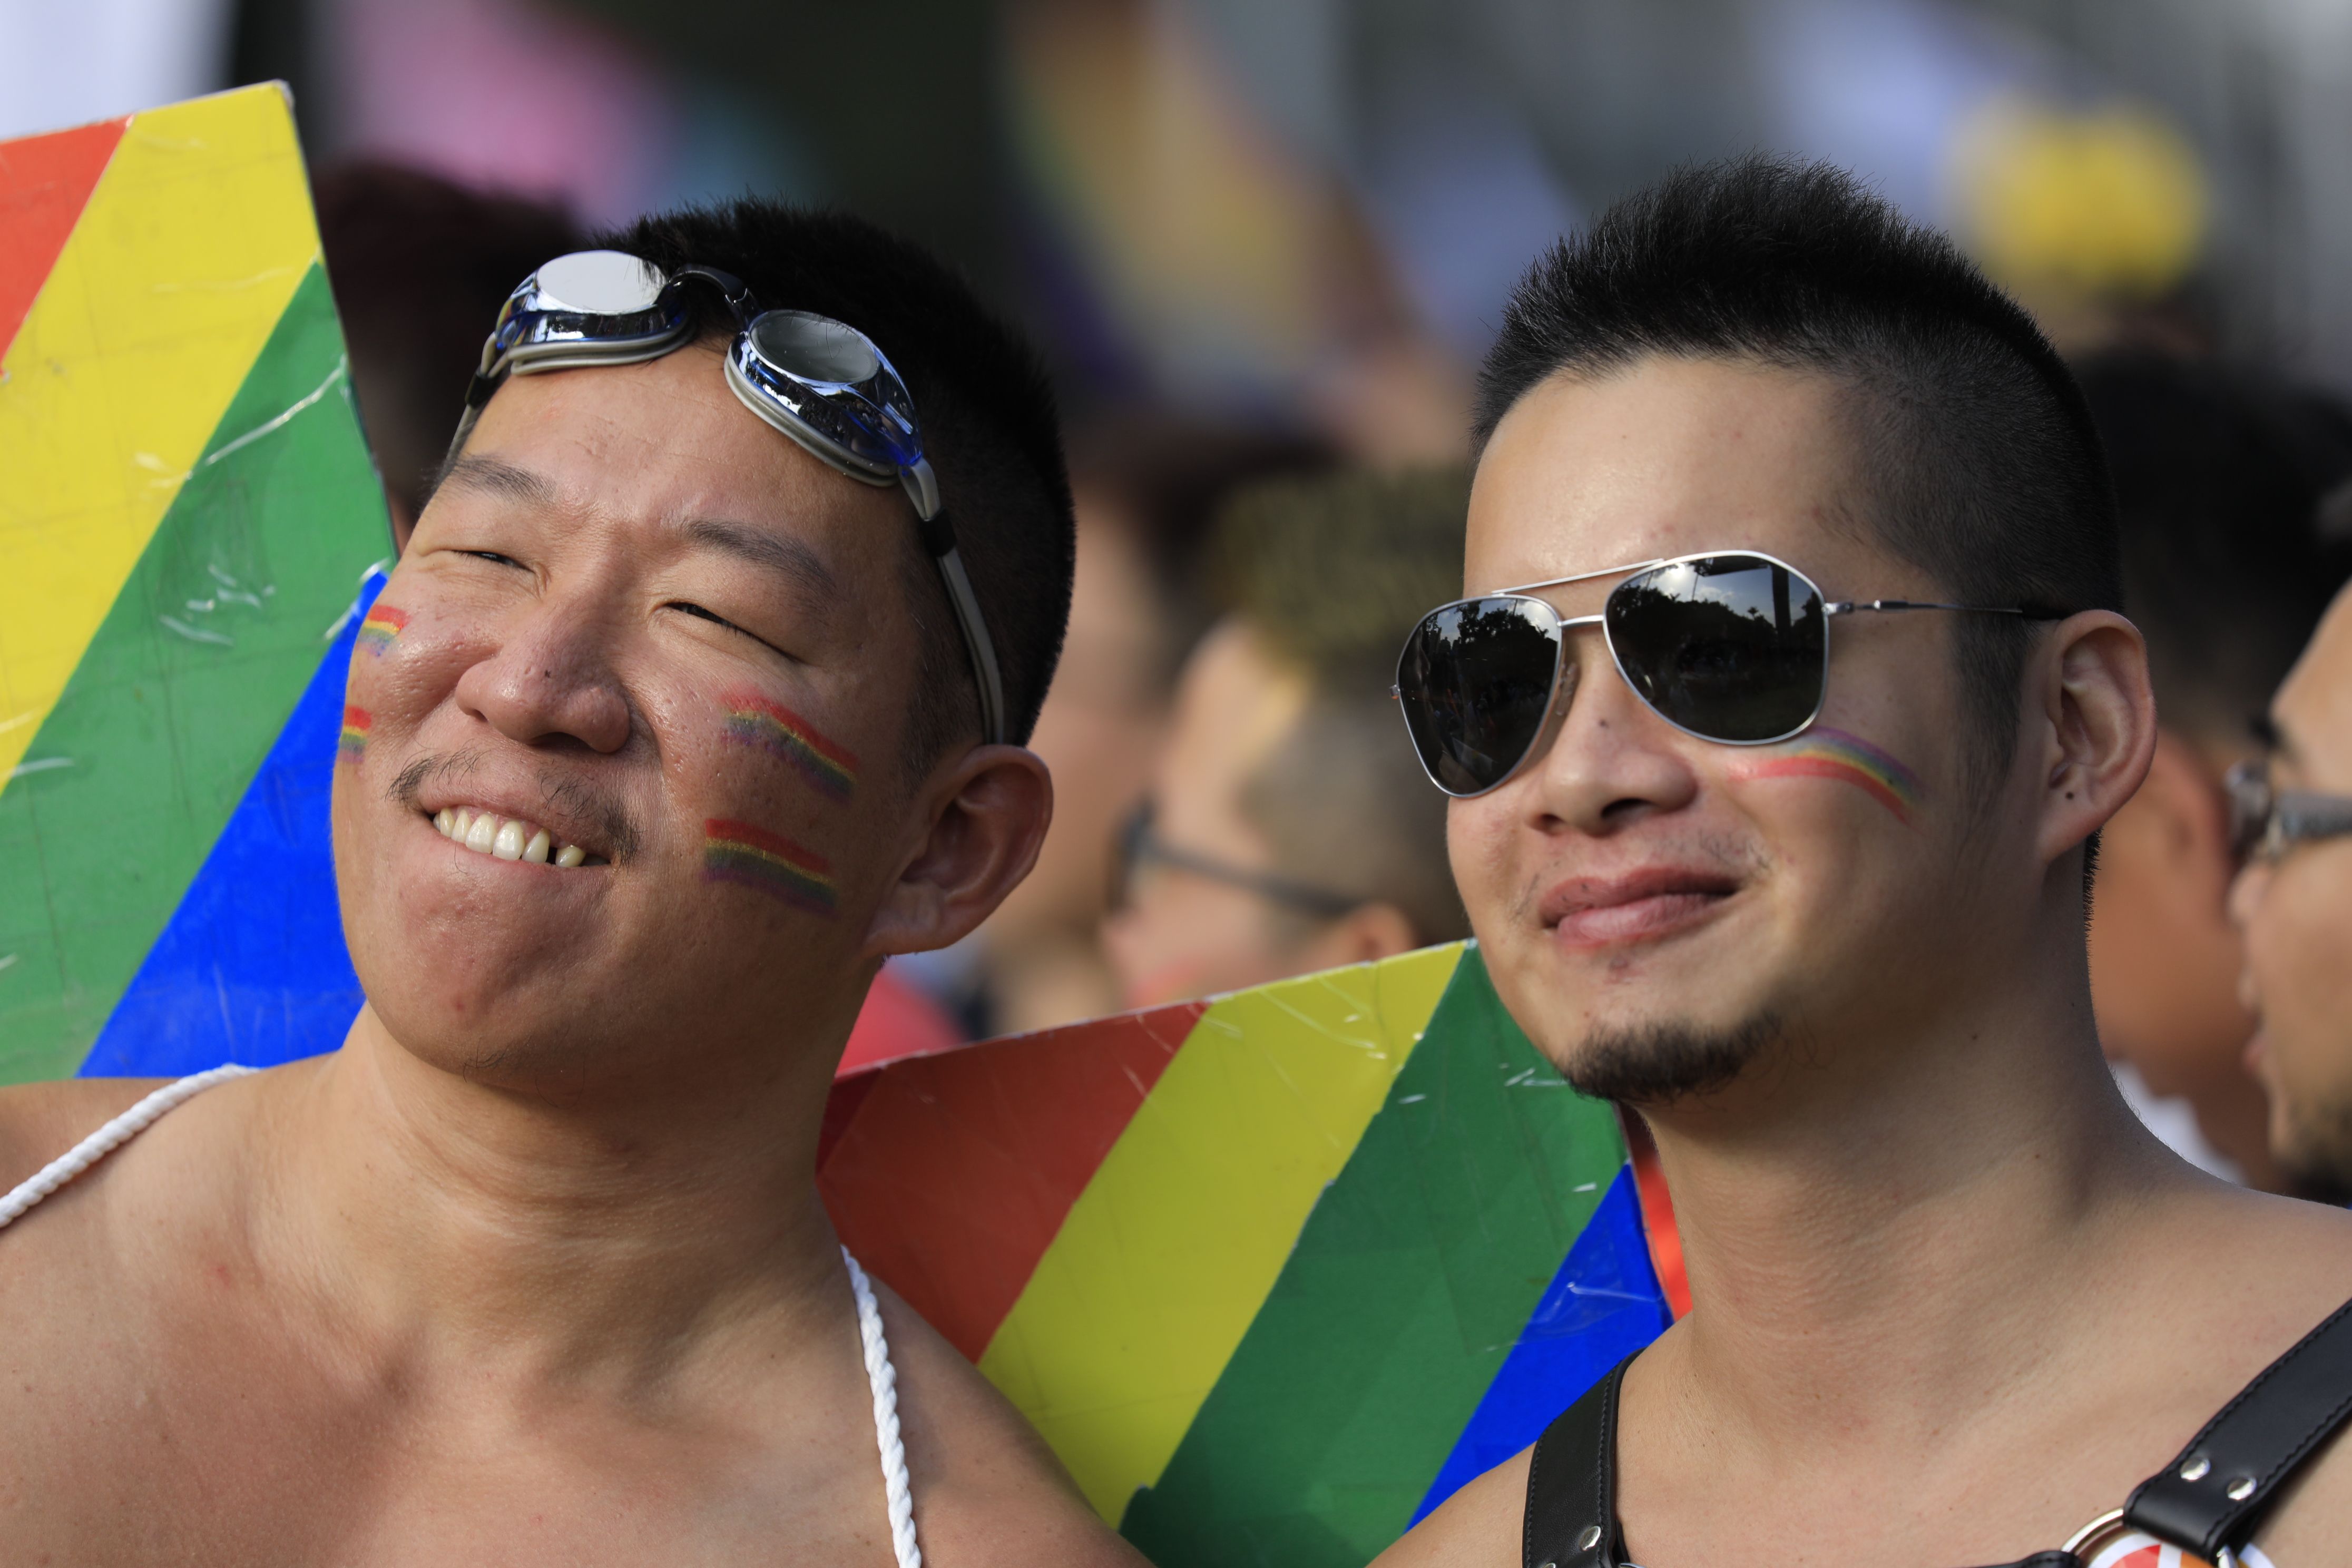 Over 150 people will be married on the first day of gay marriage being legal in Taiwan. 